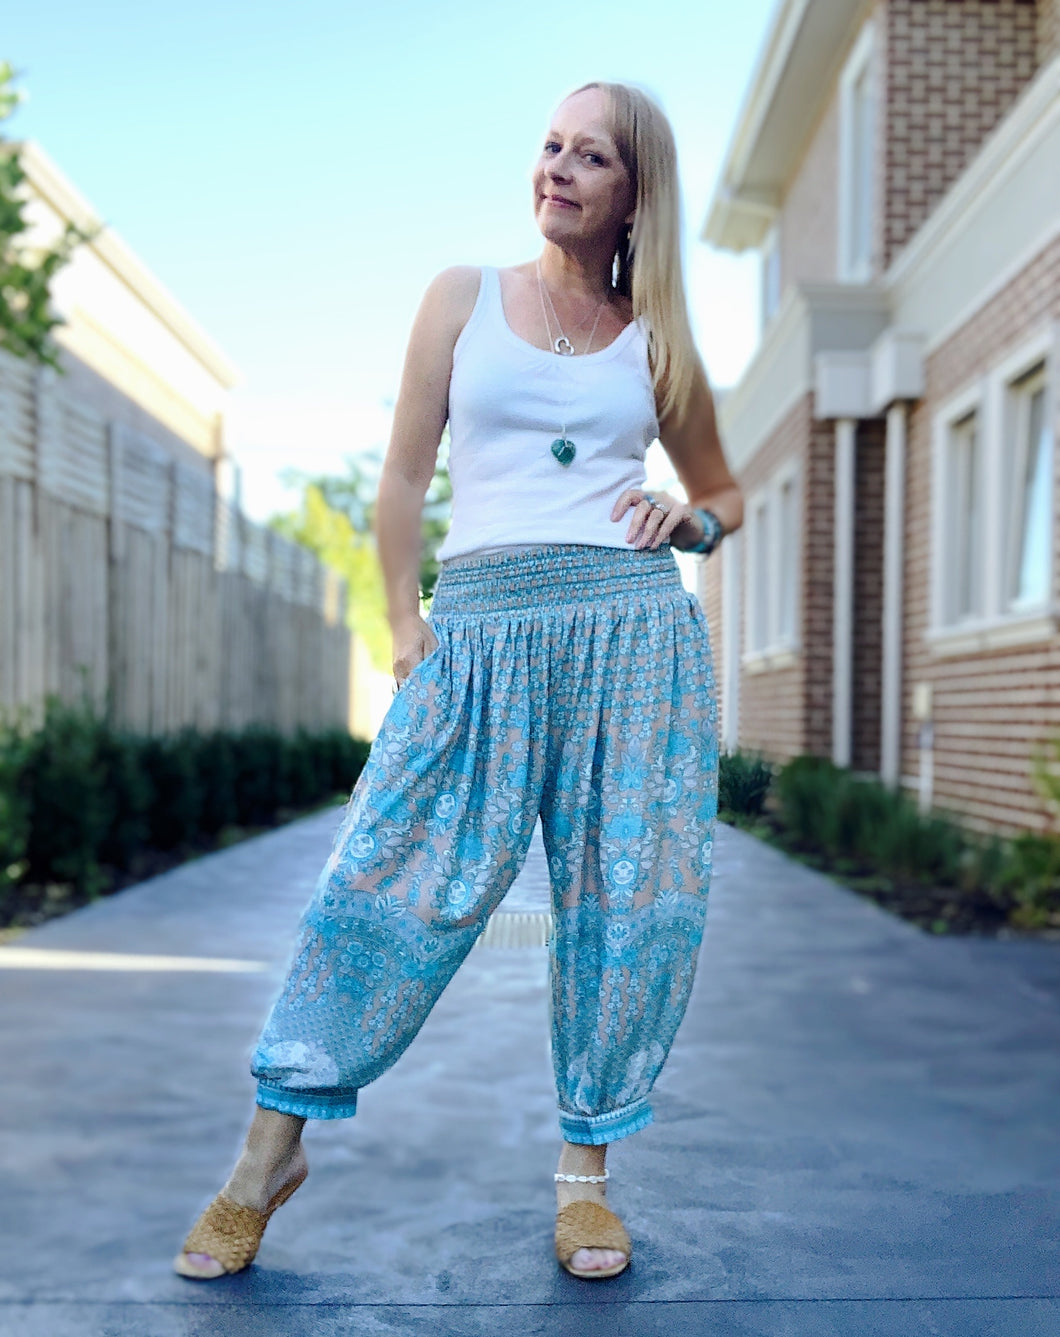 Buy Solid Cotton Pant With Hand Embroidery Harembohemian Pants Online in  India  Etsy